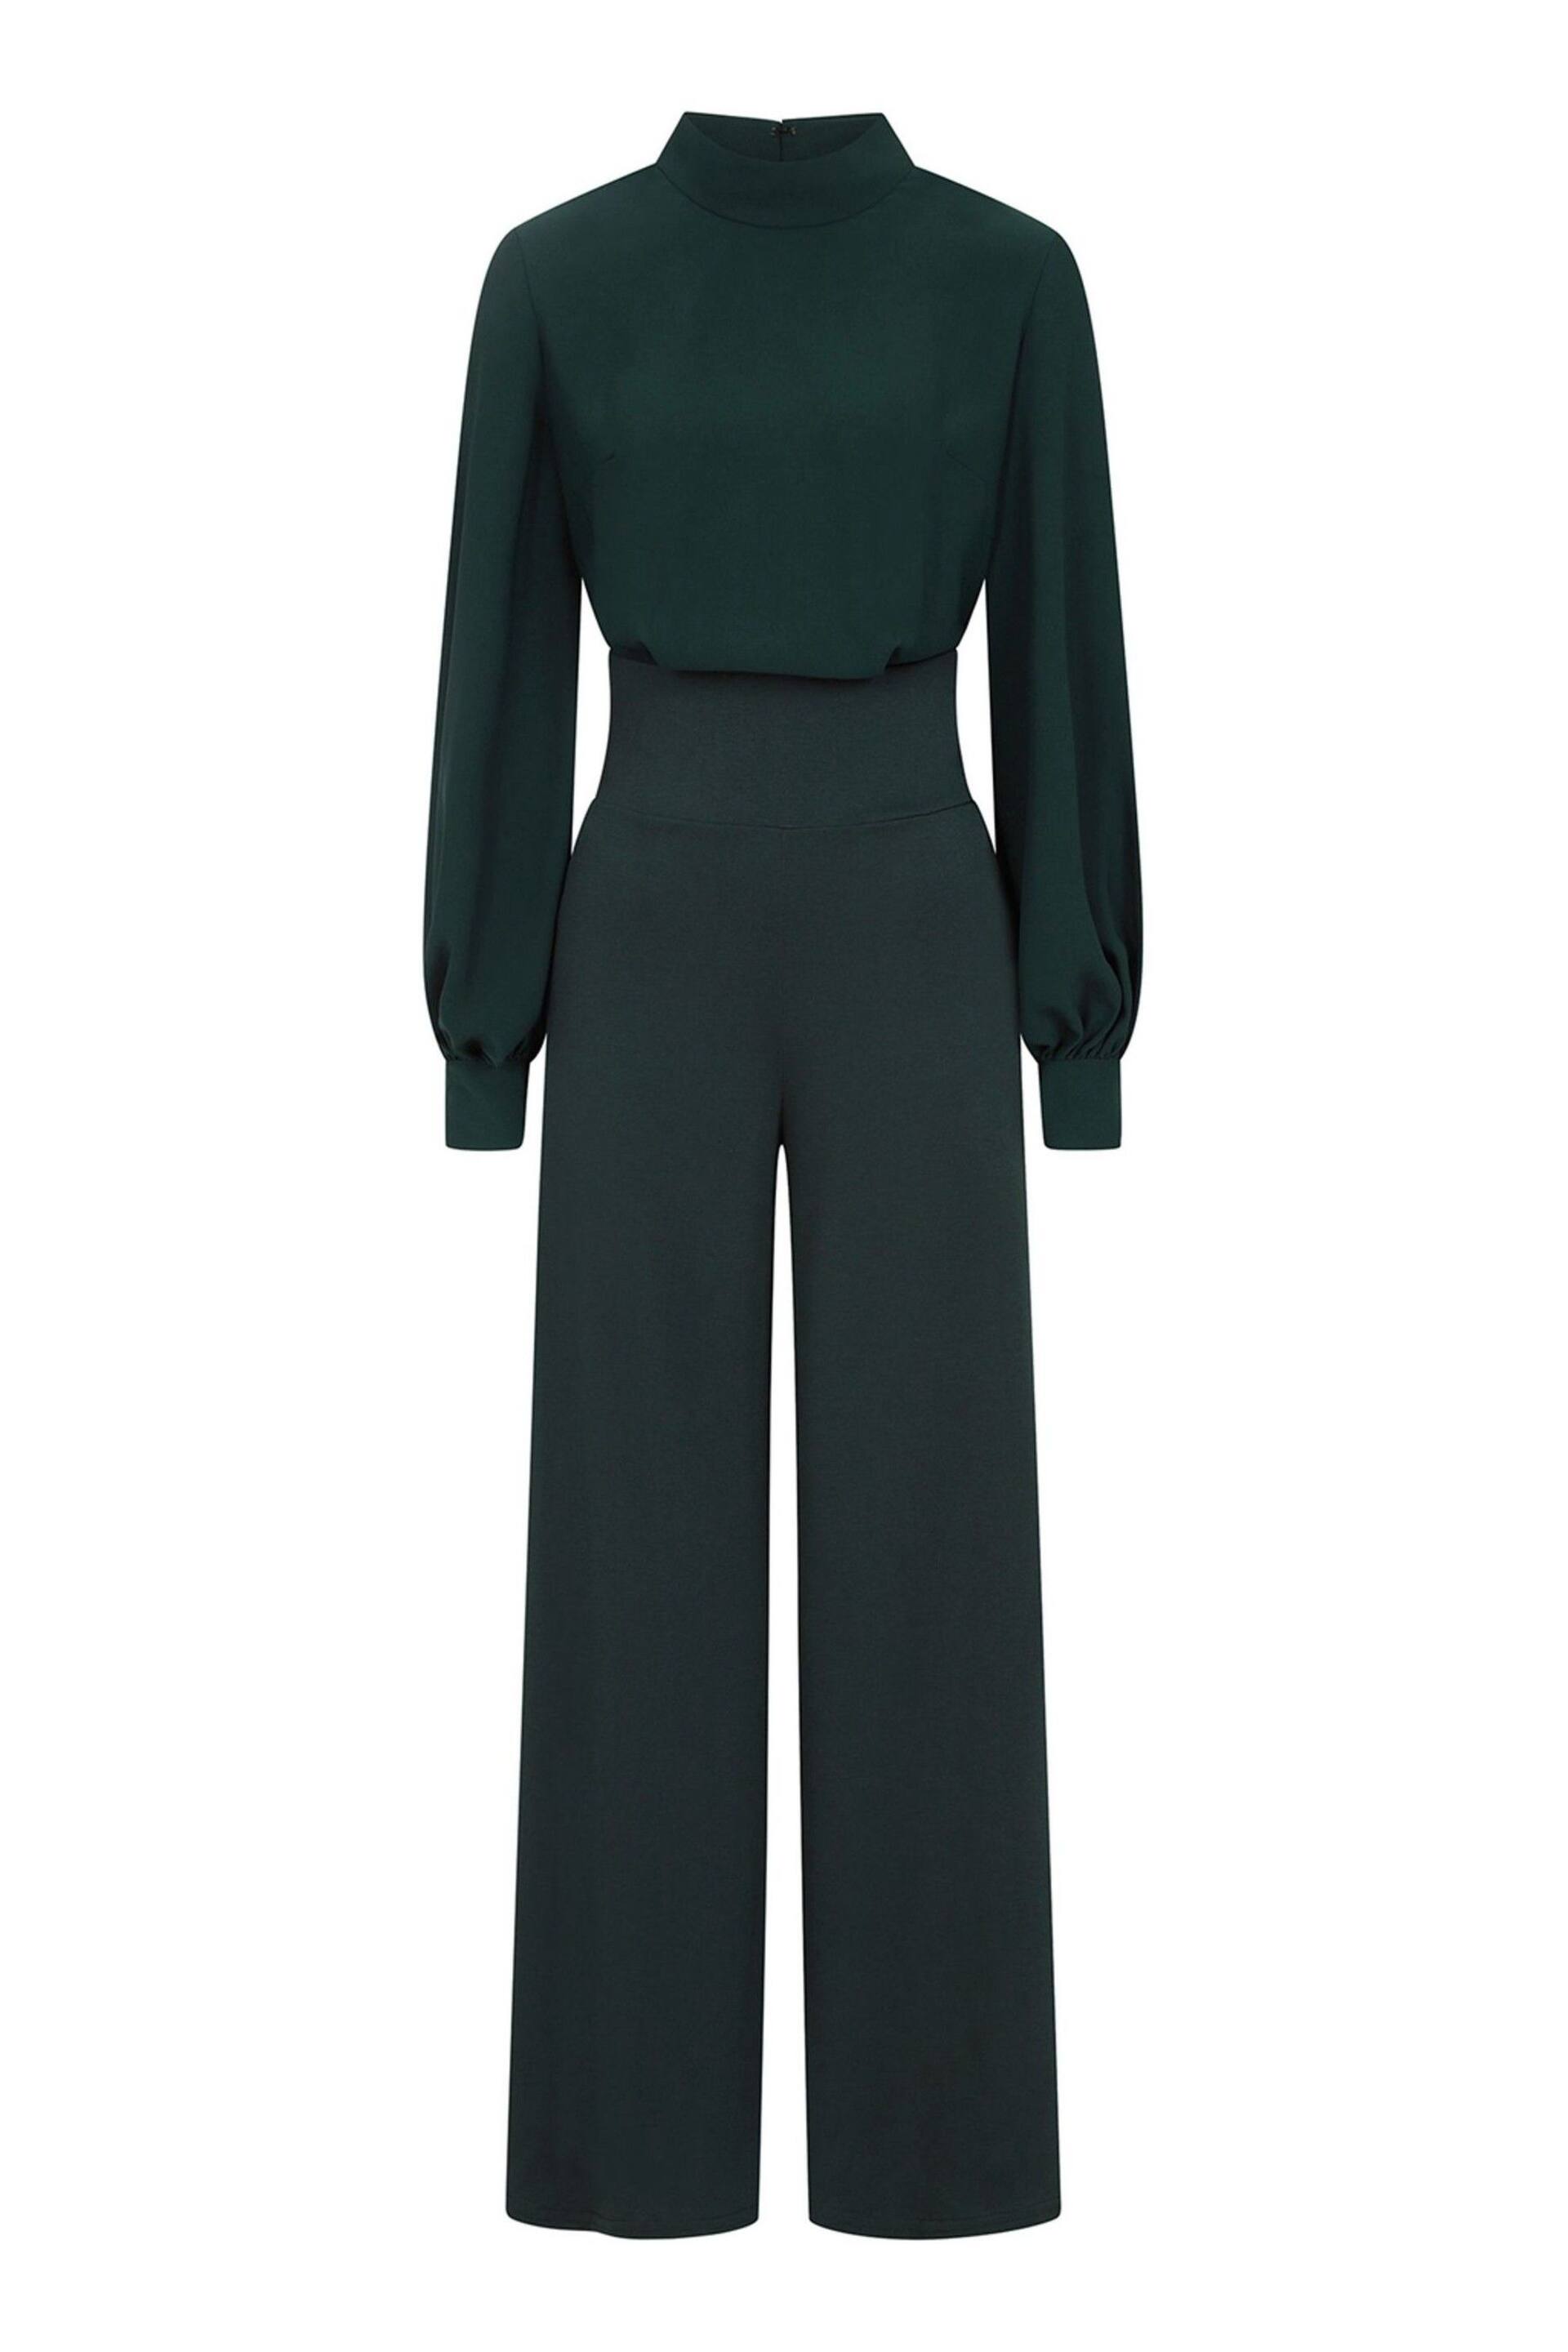 HotSquash Green Wide Leg Jumpsuit With Blouson Sleeve - Image 3 of 3